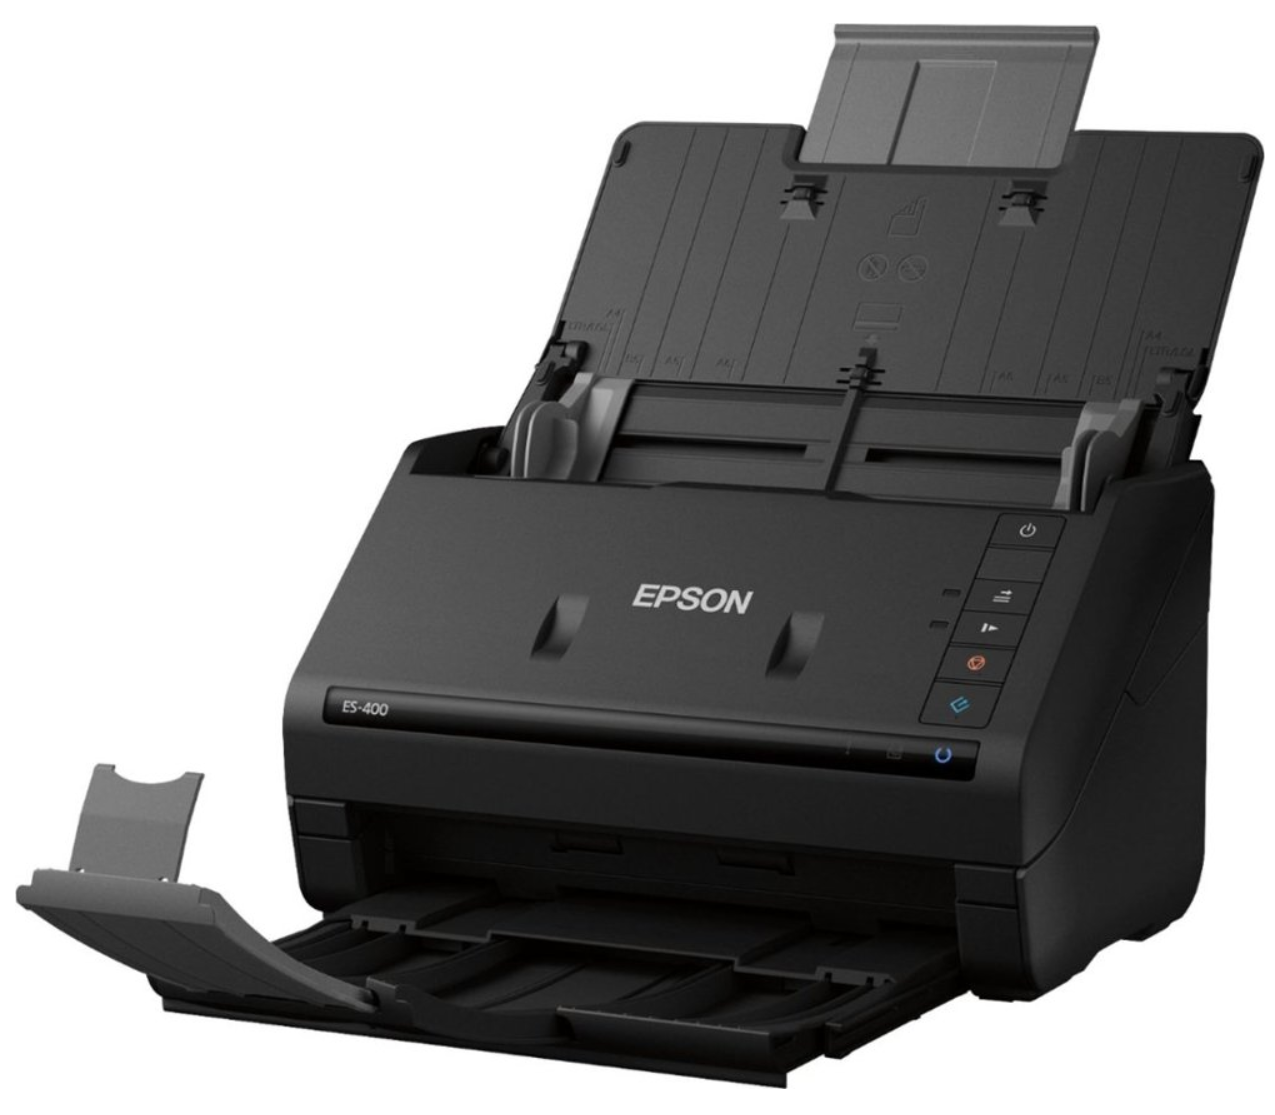 Kronozio is now supporting the Epson  ES 400 